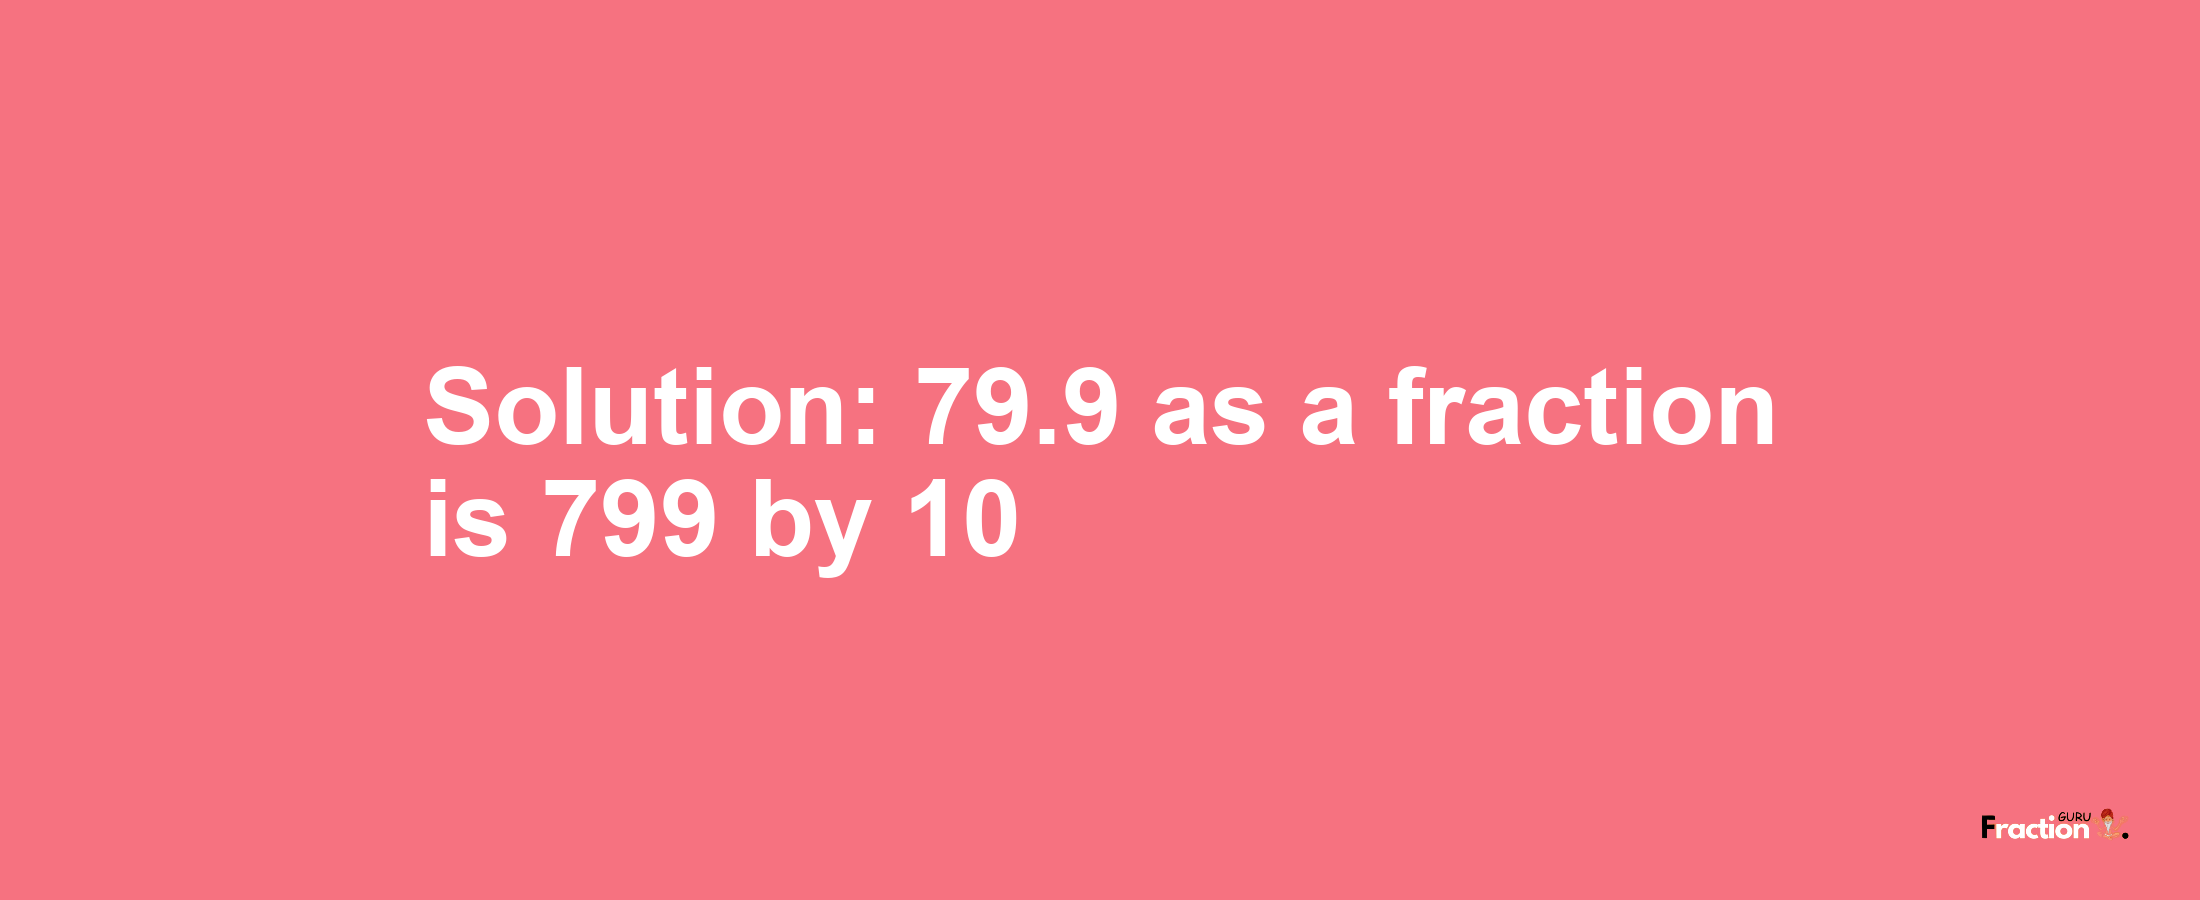 Solution:79.9 as a fraction is 799/10